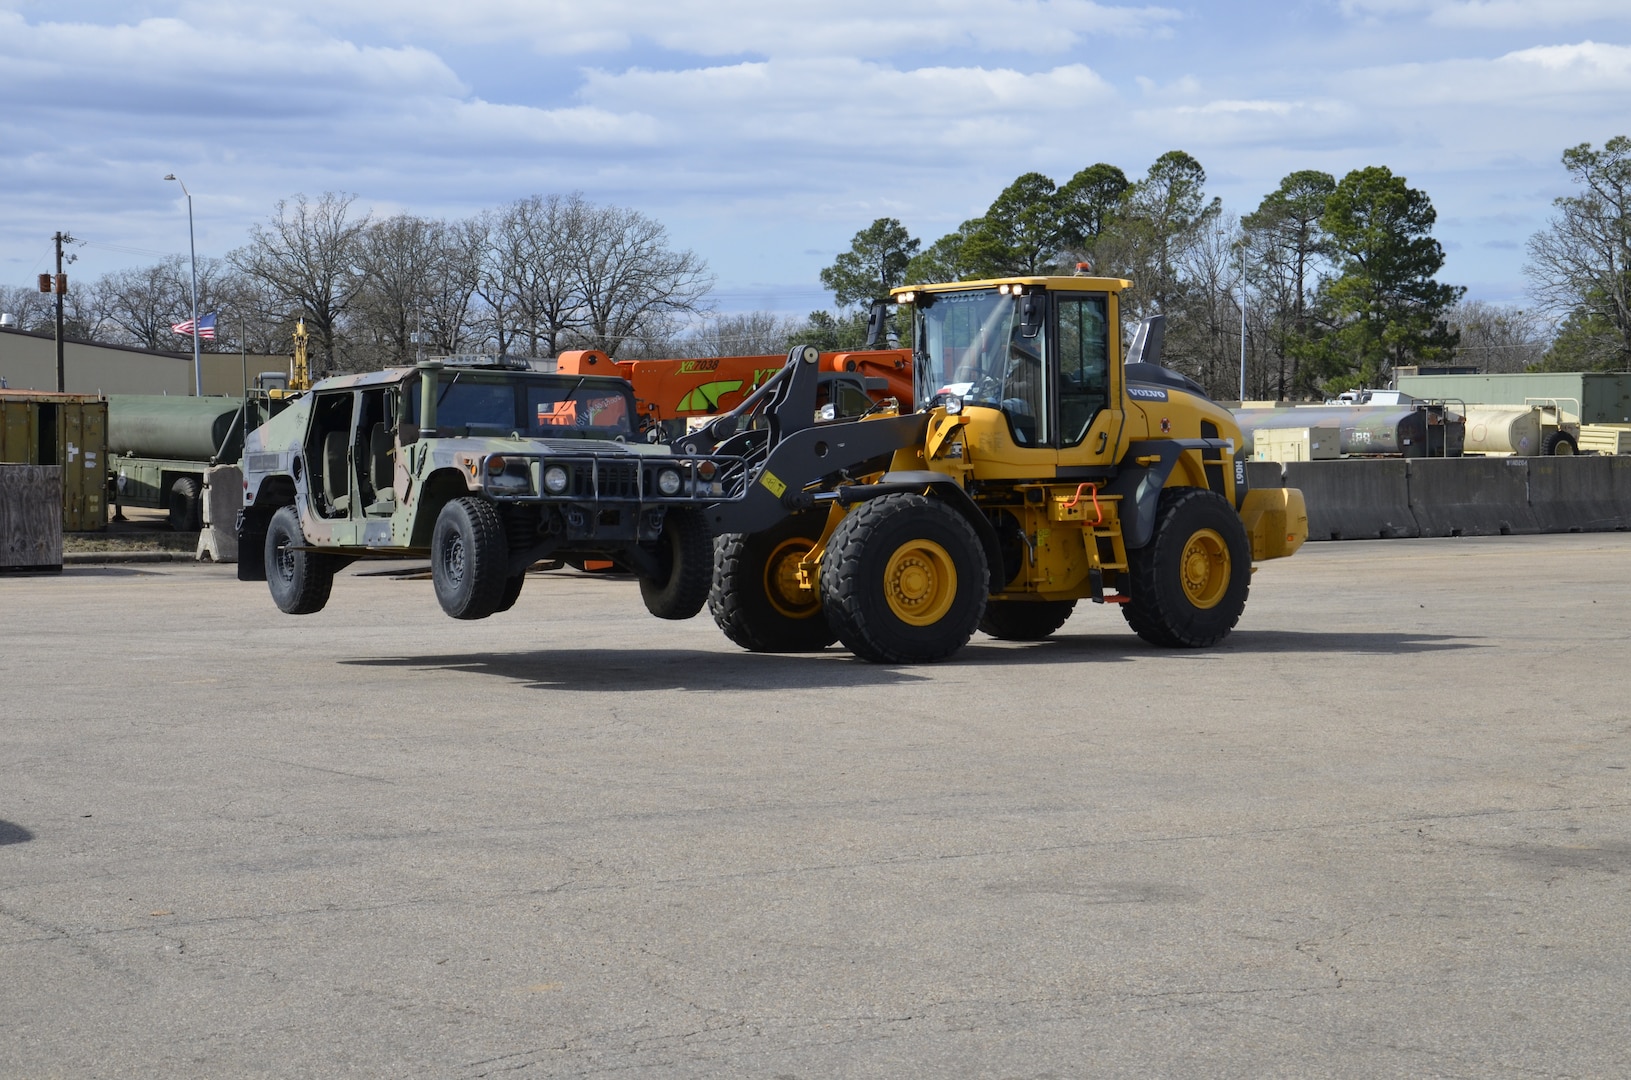 Dennis Keener, one of the 116 team members honored, operates a forklift to unload a Hummer turned into the Defense Logistics Agency Disposition Services at Red River, Texas, Feb. 25, 2020